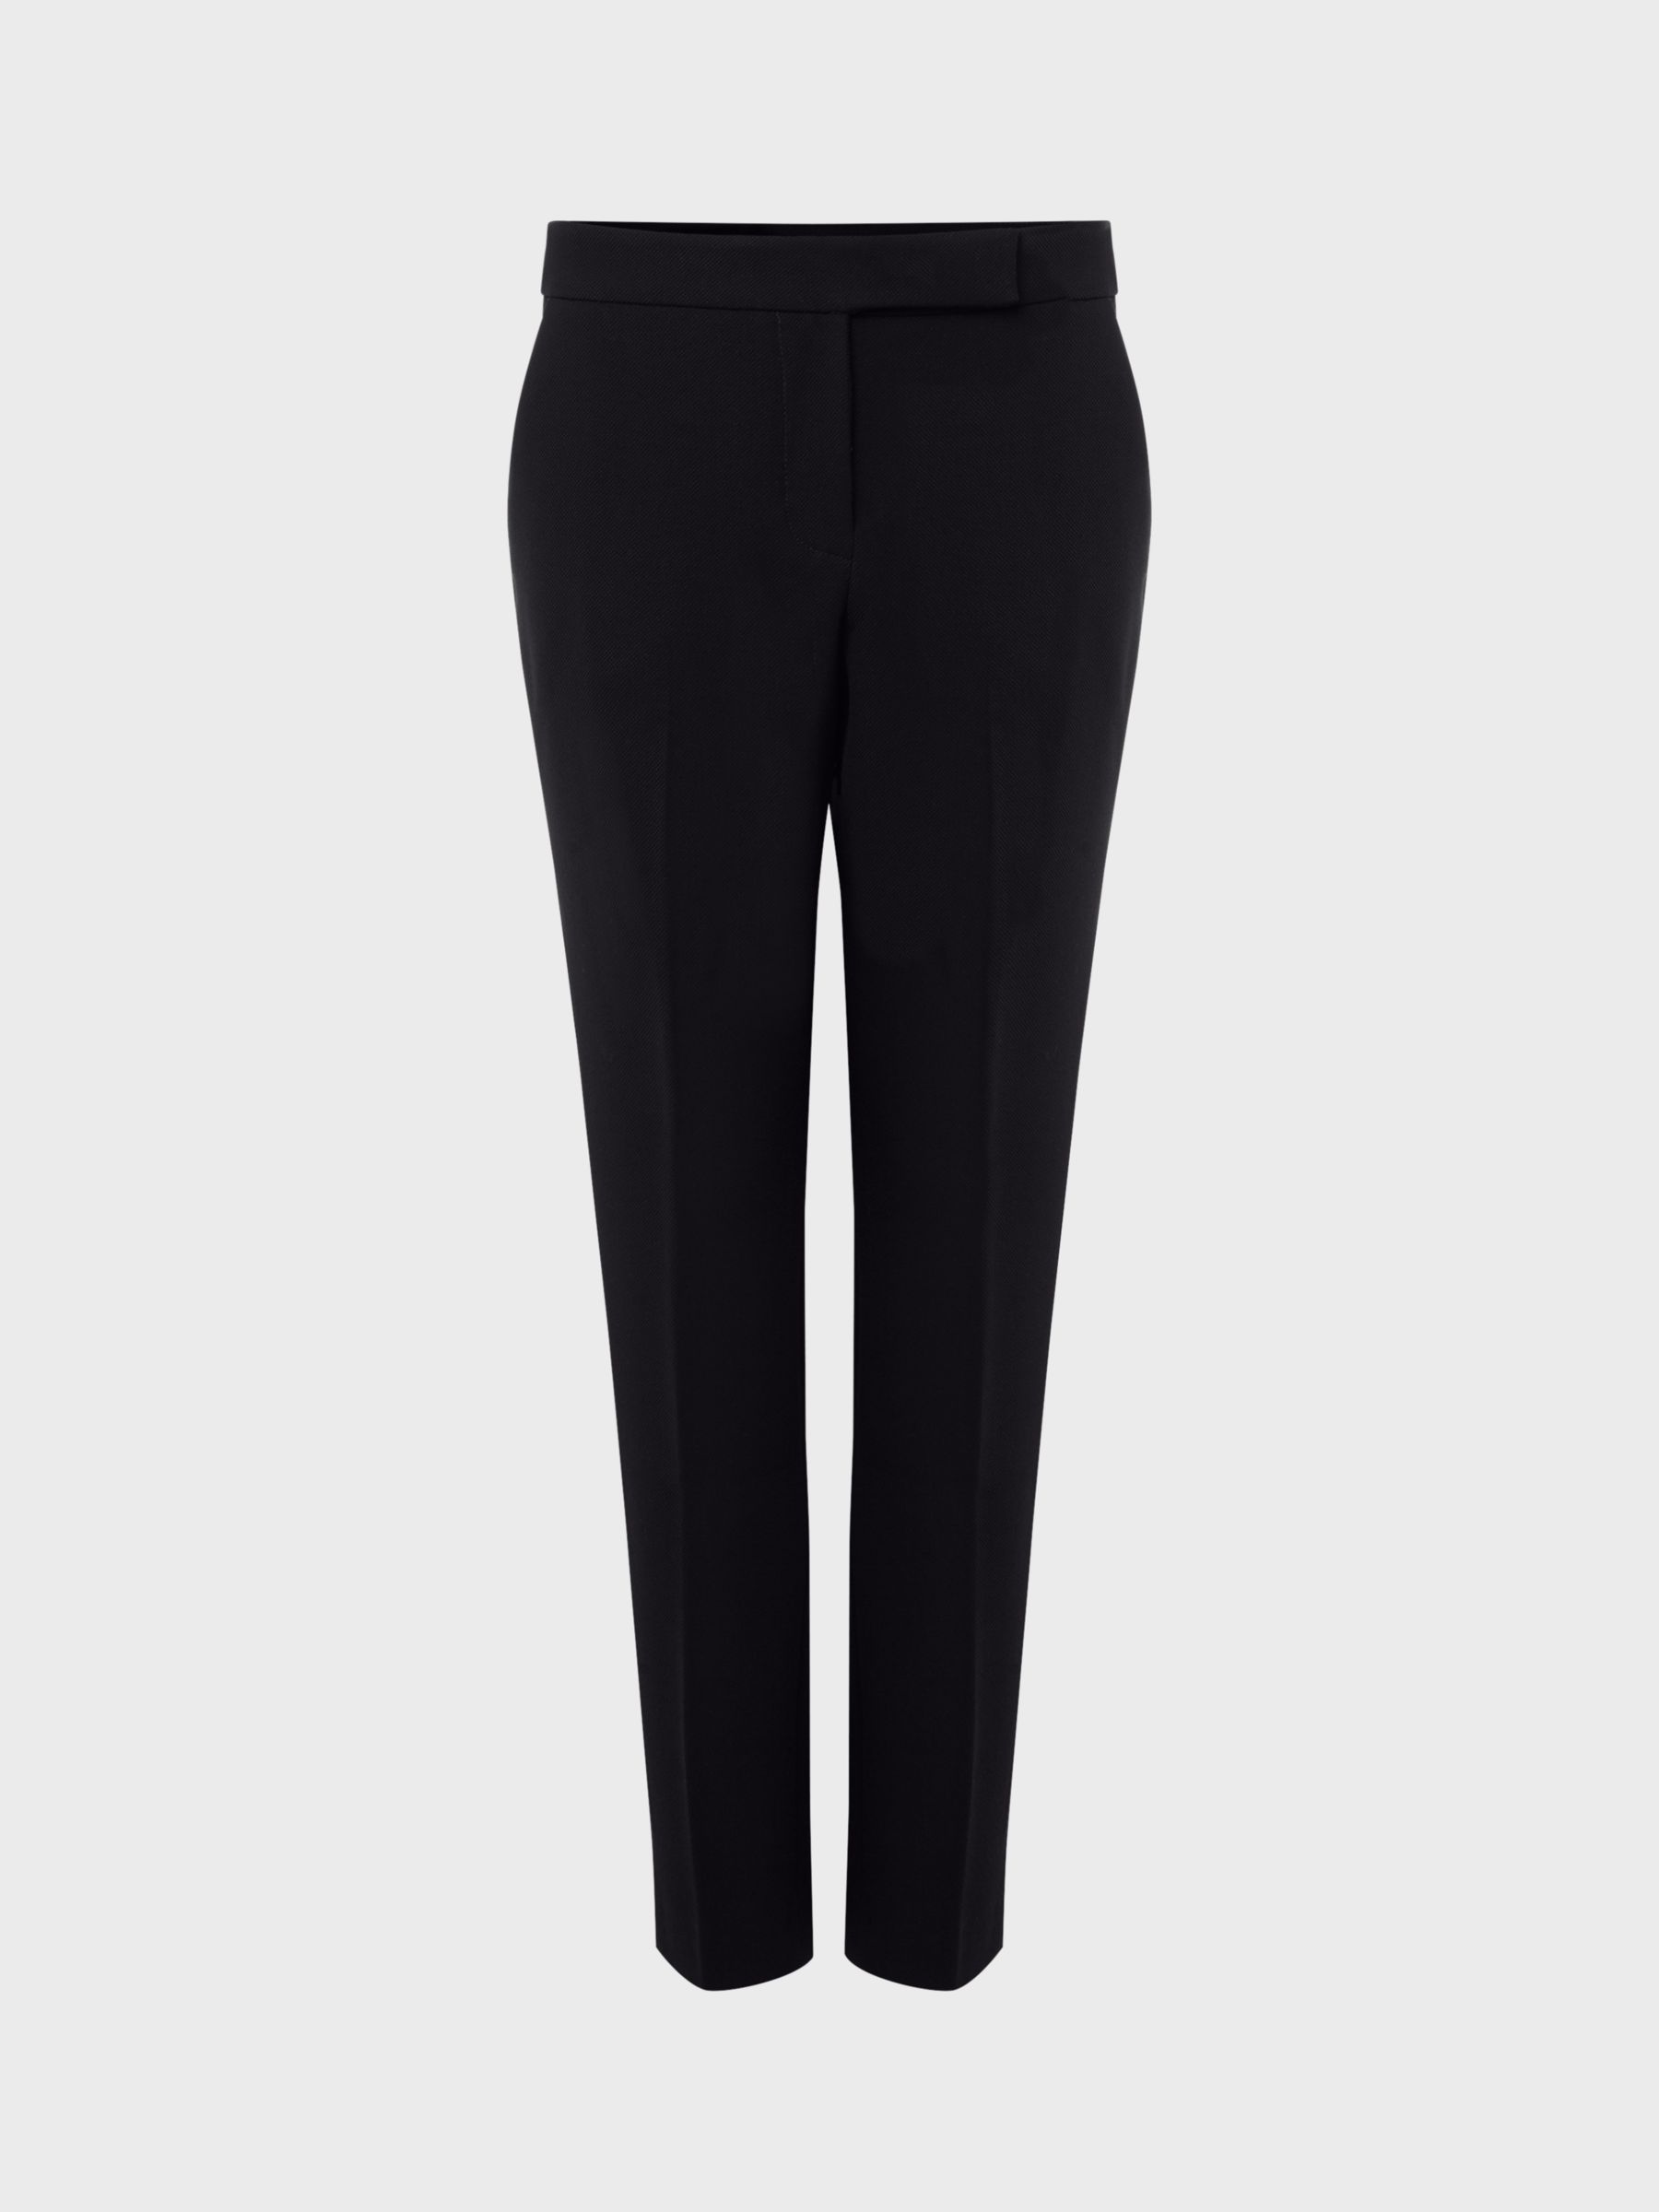 Hobbs Mia Tapered Ankle Grazer Trousers, Navy at John Lewis & Partners